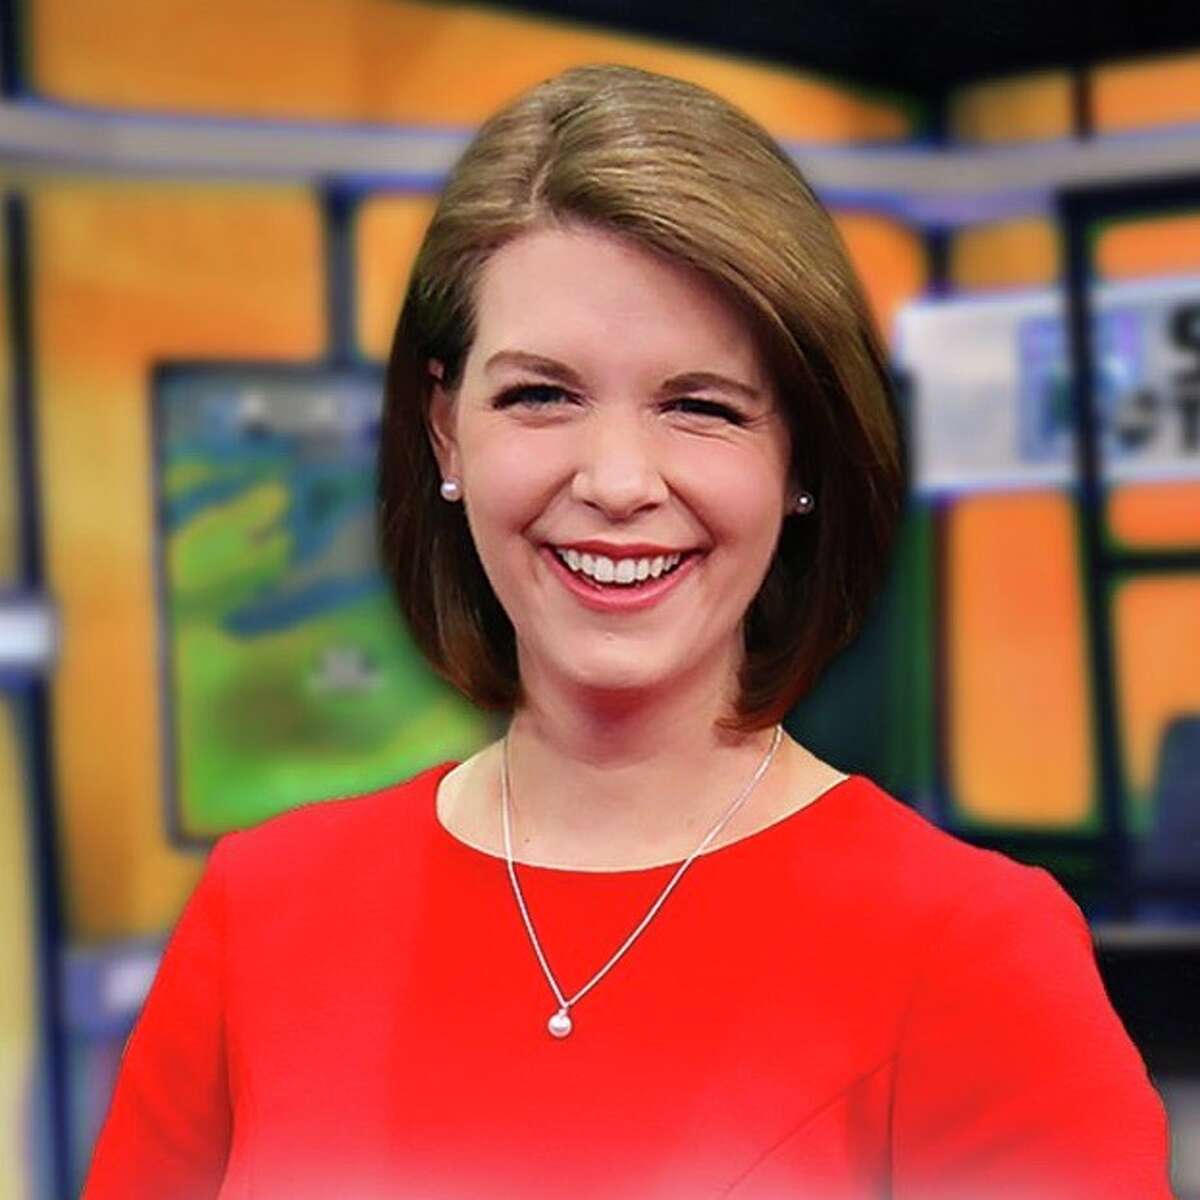 Scroll down for 20 things you don't know about Jill Szwed, the new morning meteorologist on NEWS10ABC.